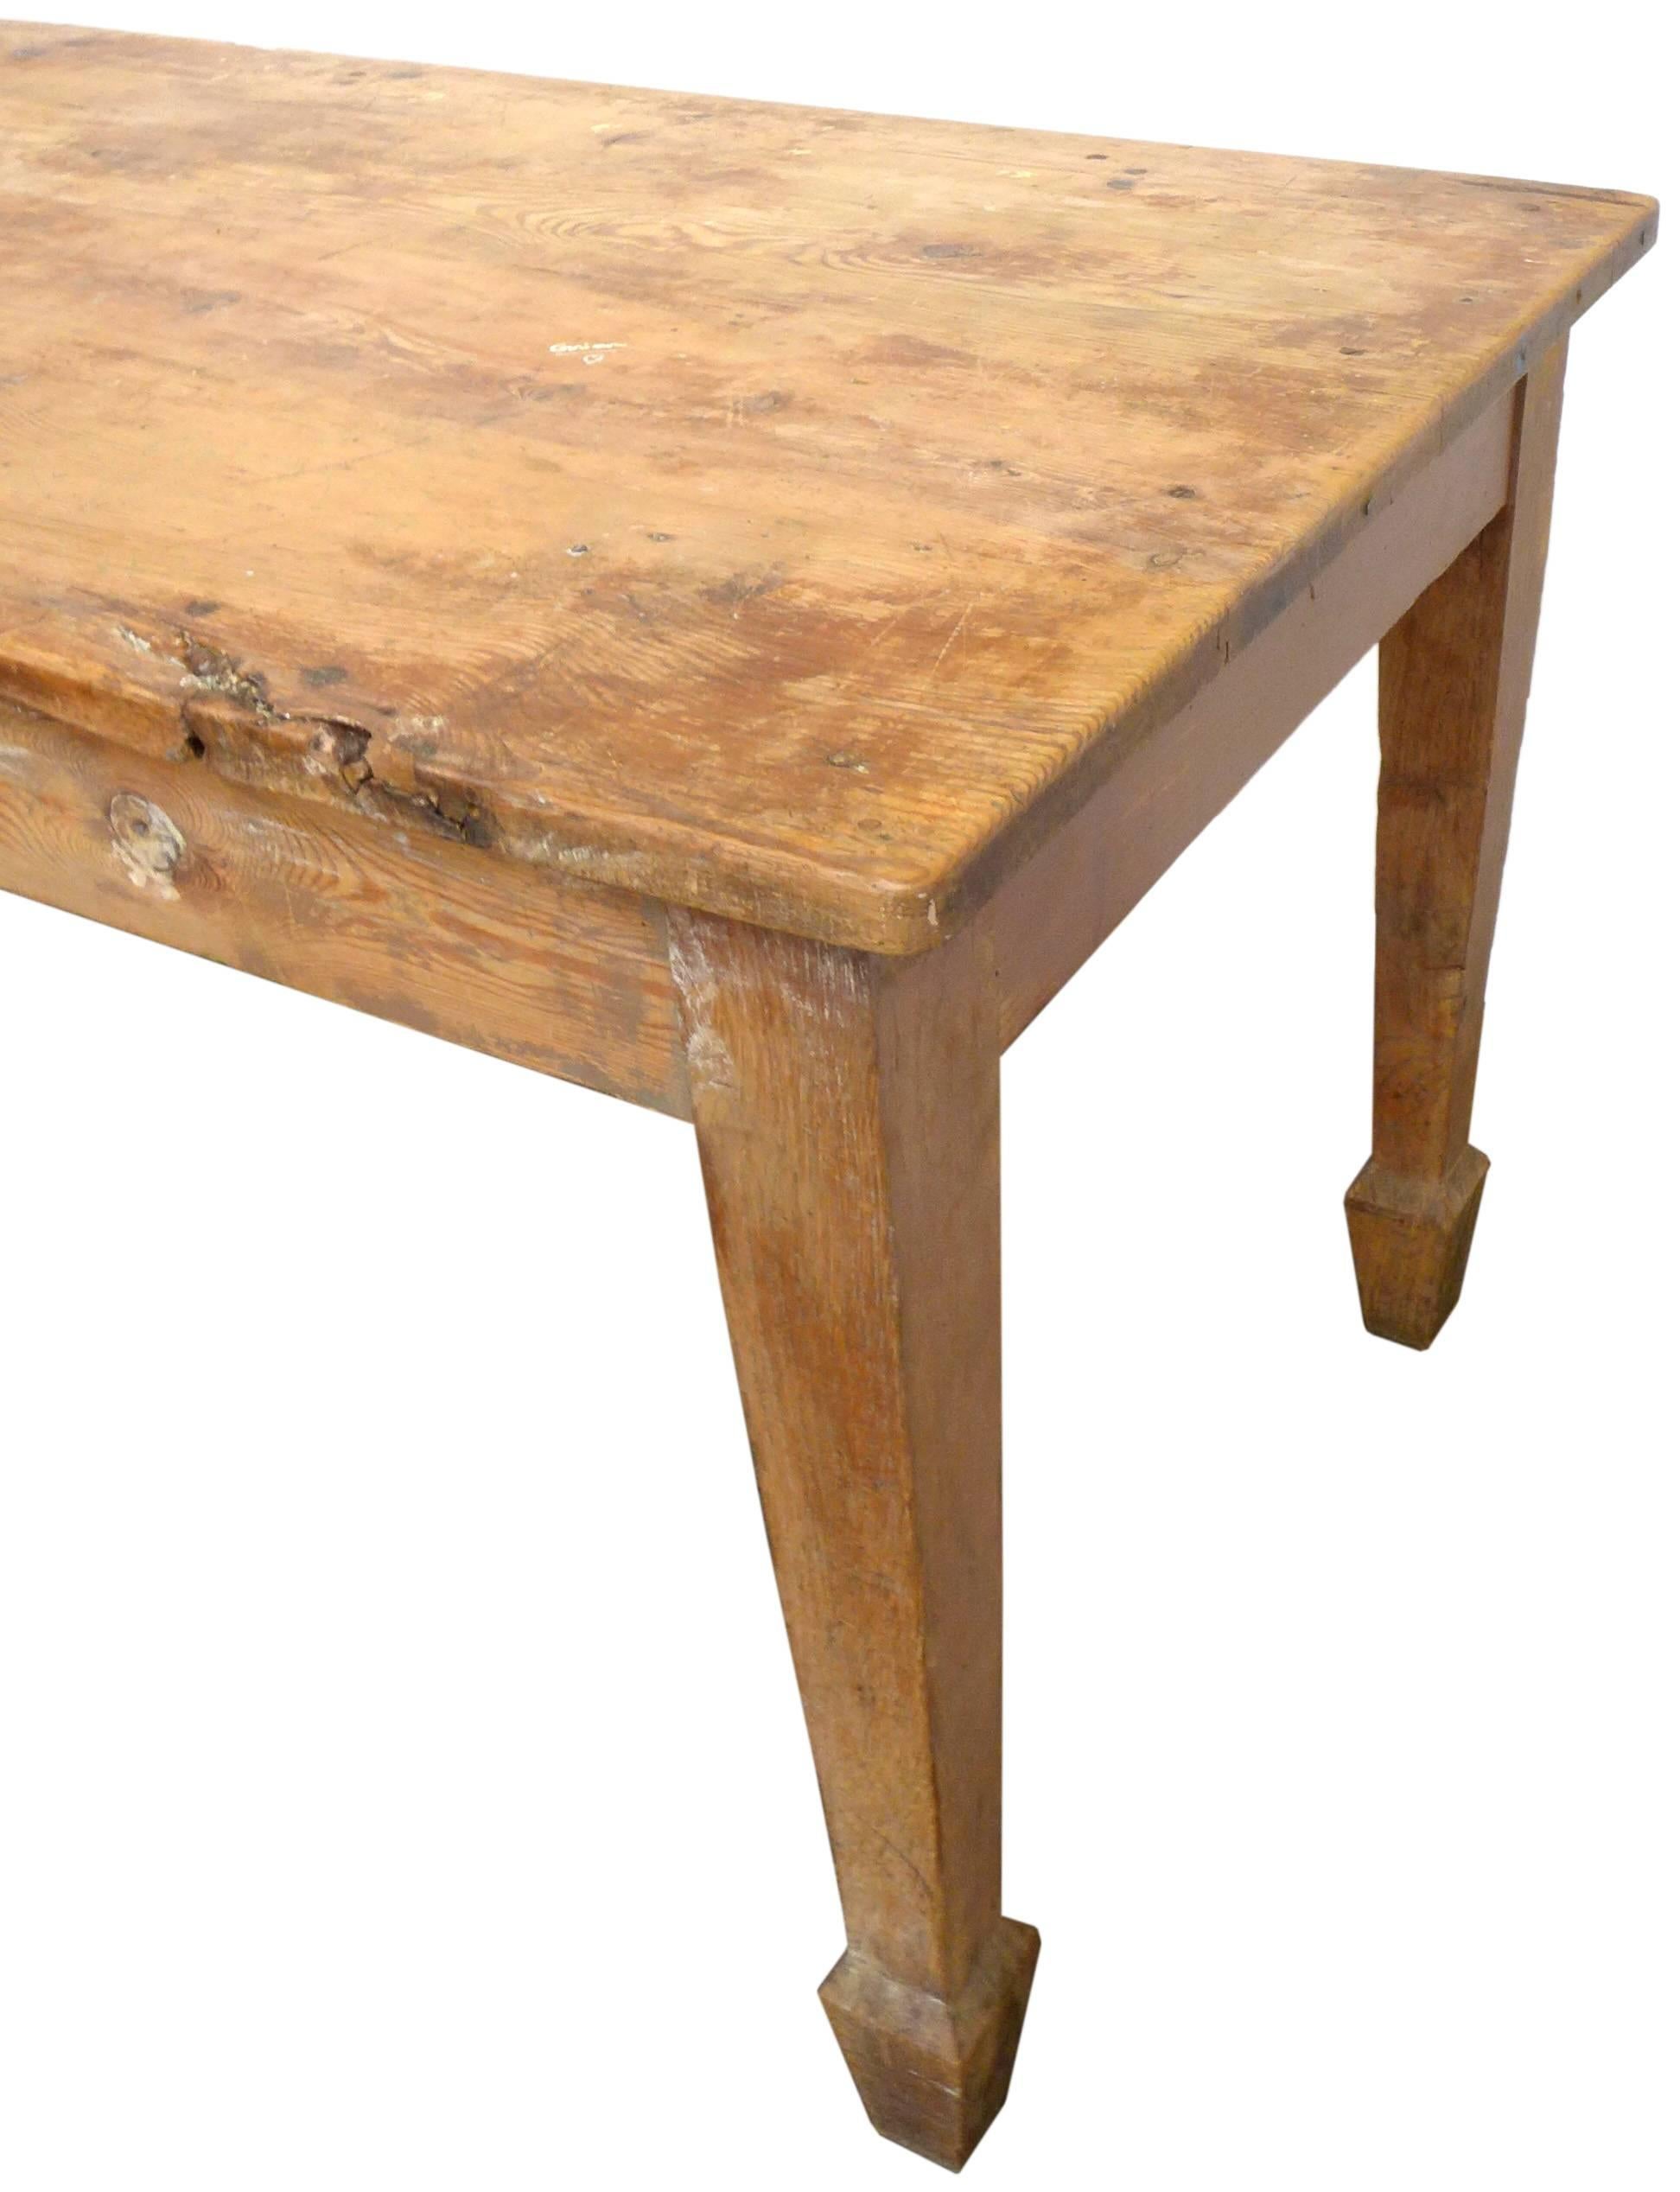 Primitive Exceptional 19th Century English Farm Dining Table For Sale